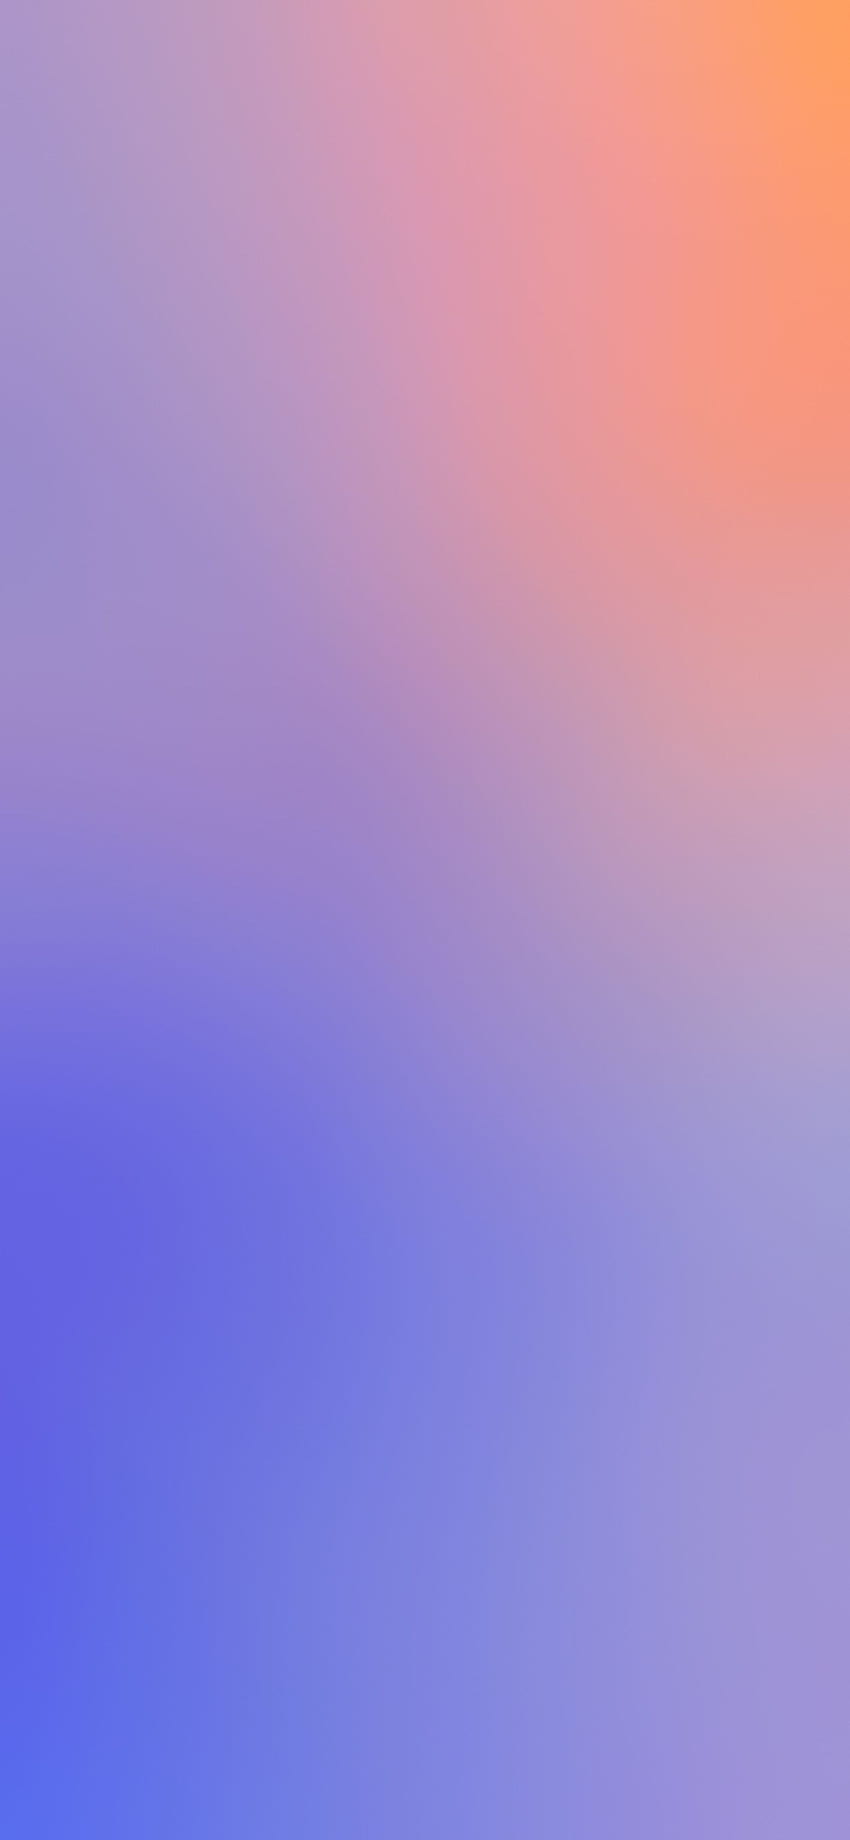 iOS 14 gradient inspirations for iPhone and iPad, iphone gradient HD phone wallpaper